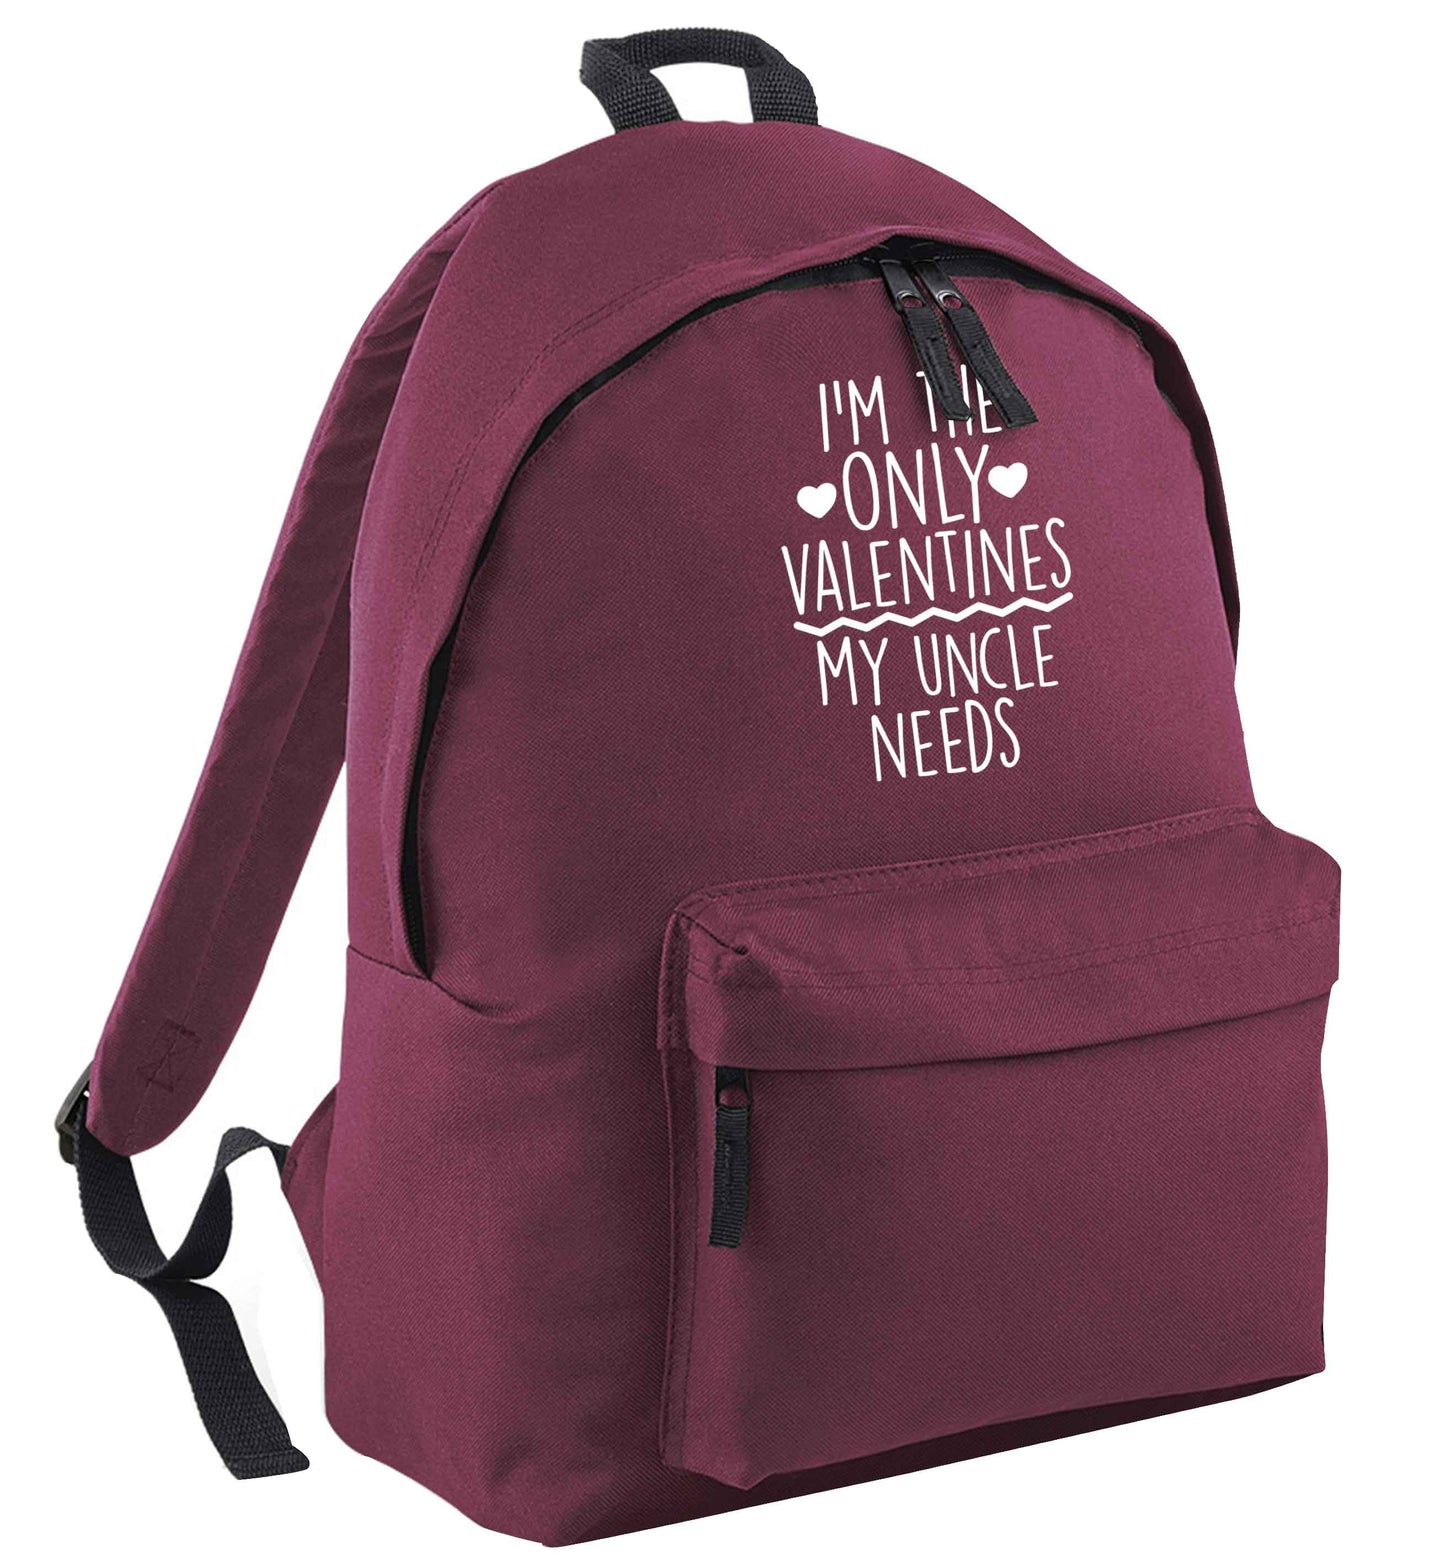 I'm the only valentines my uncle needs black childrens backpack